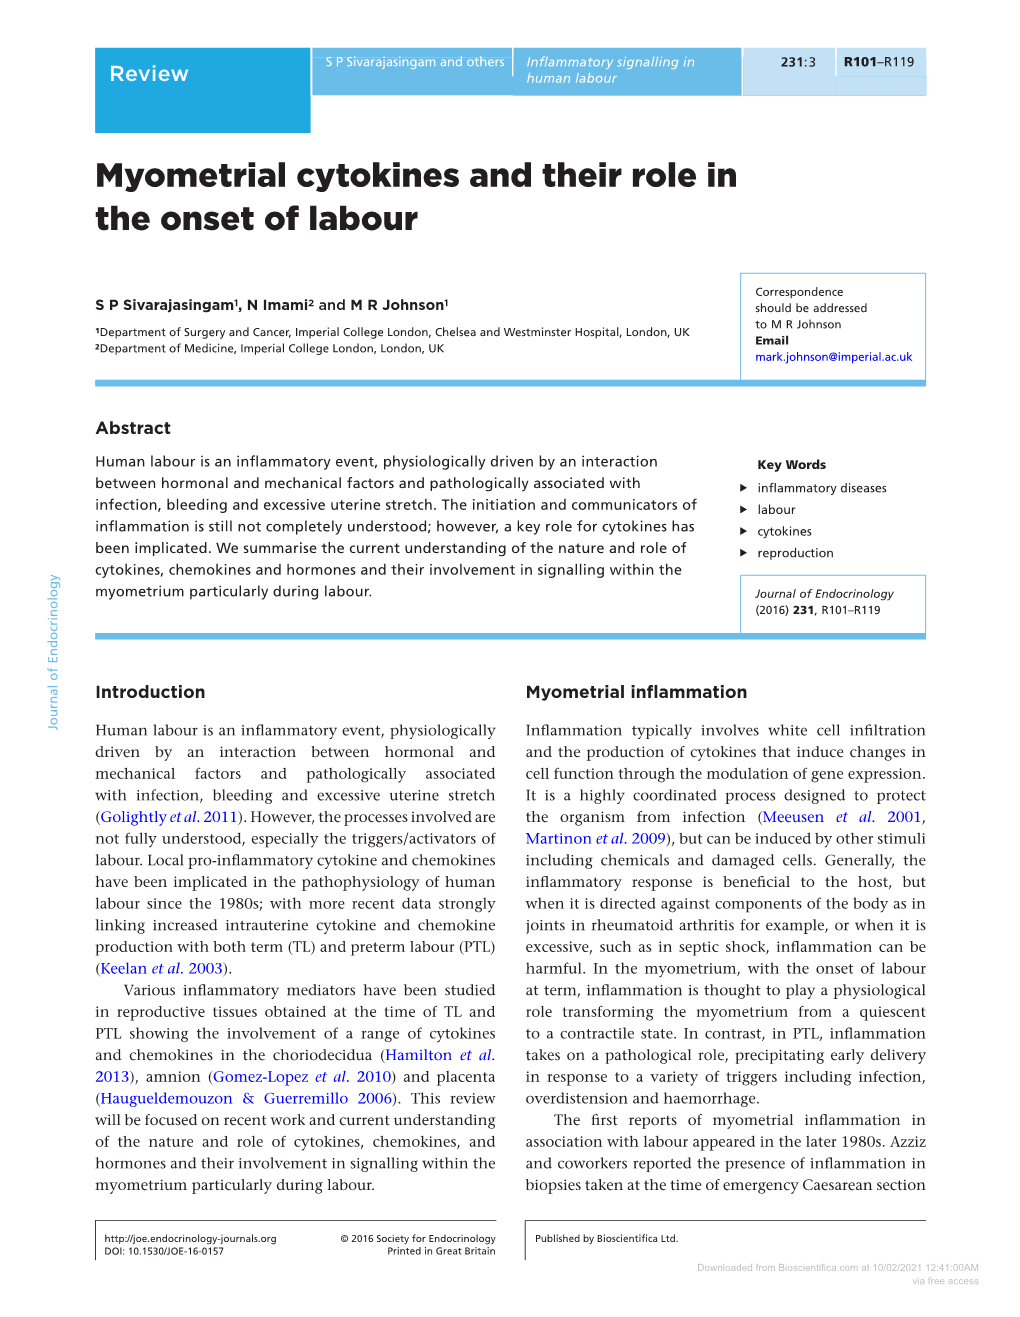 Myometrial Cytokines and Their Role in the Onset of Labour